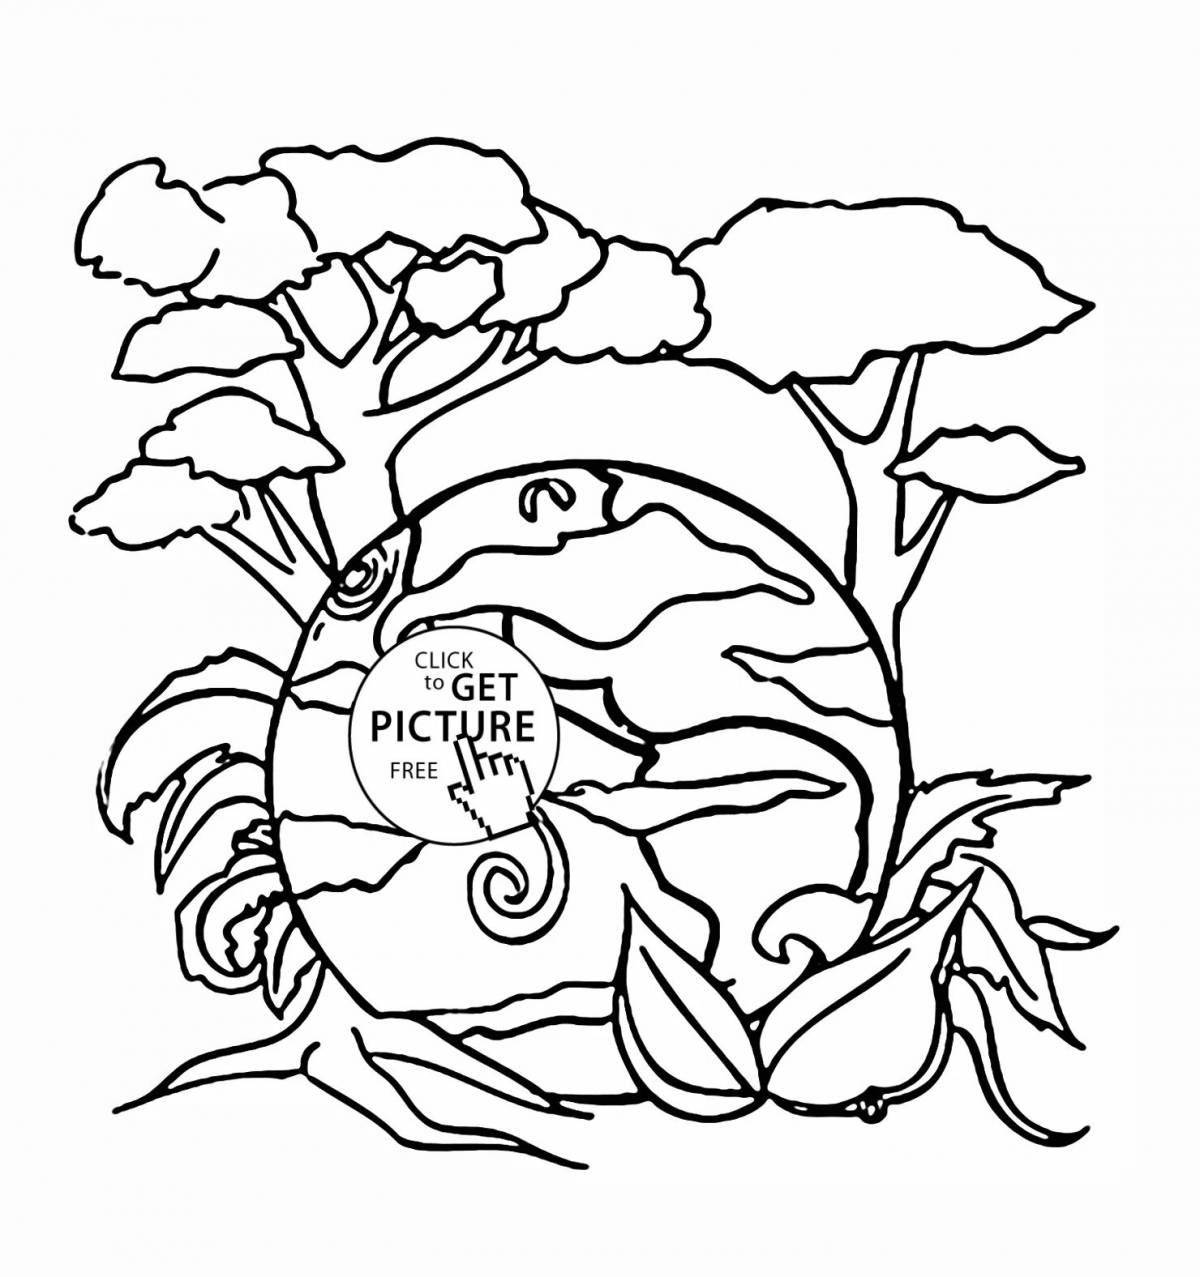 Creative eco coloring book for kids